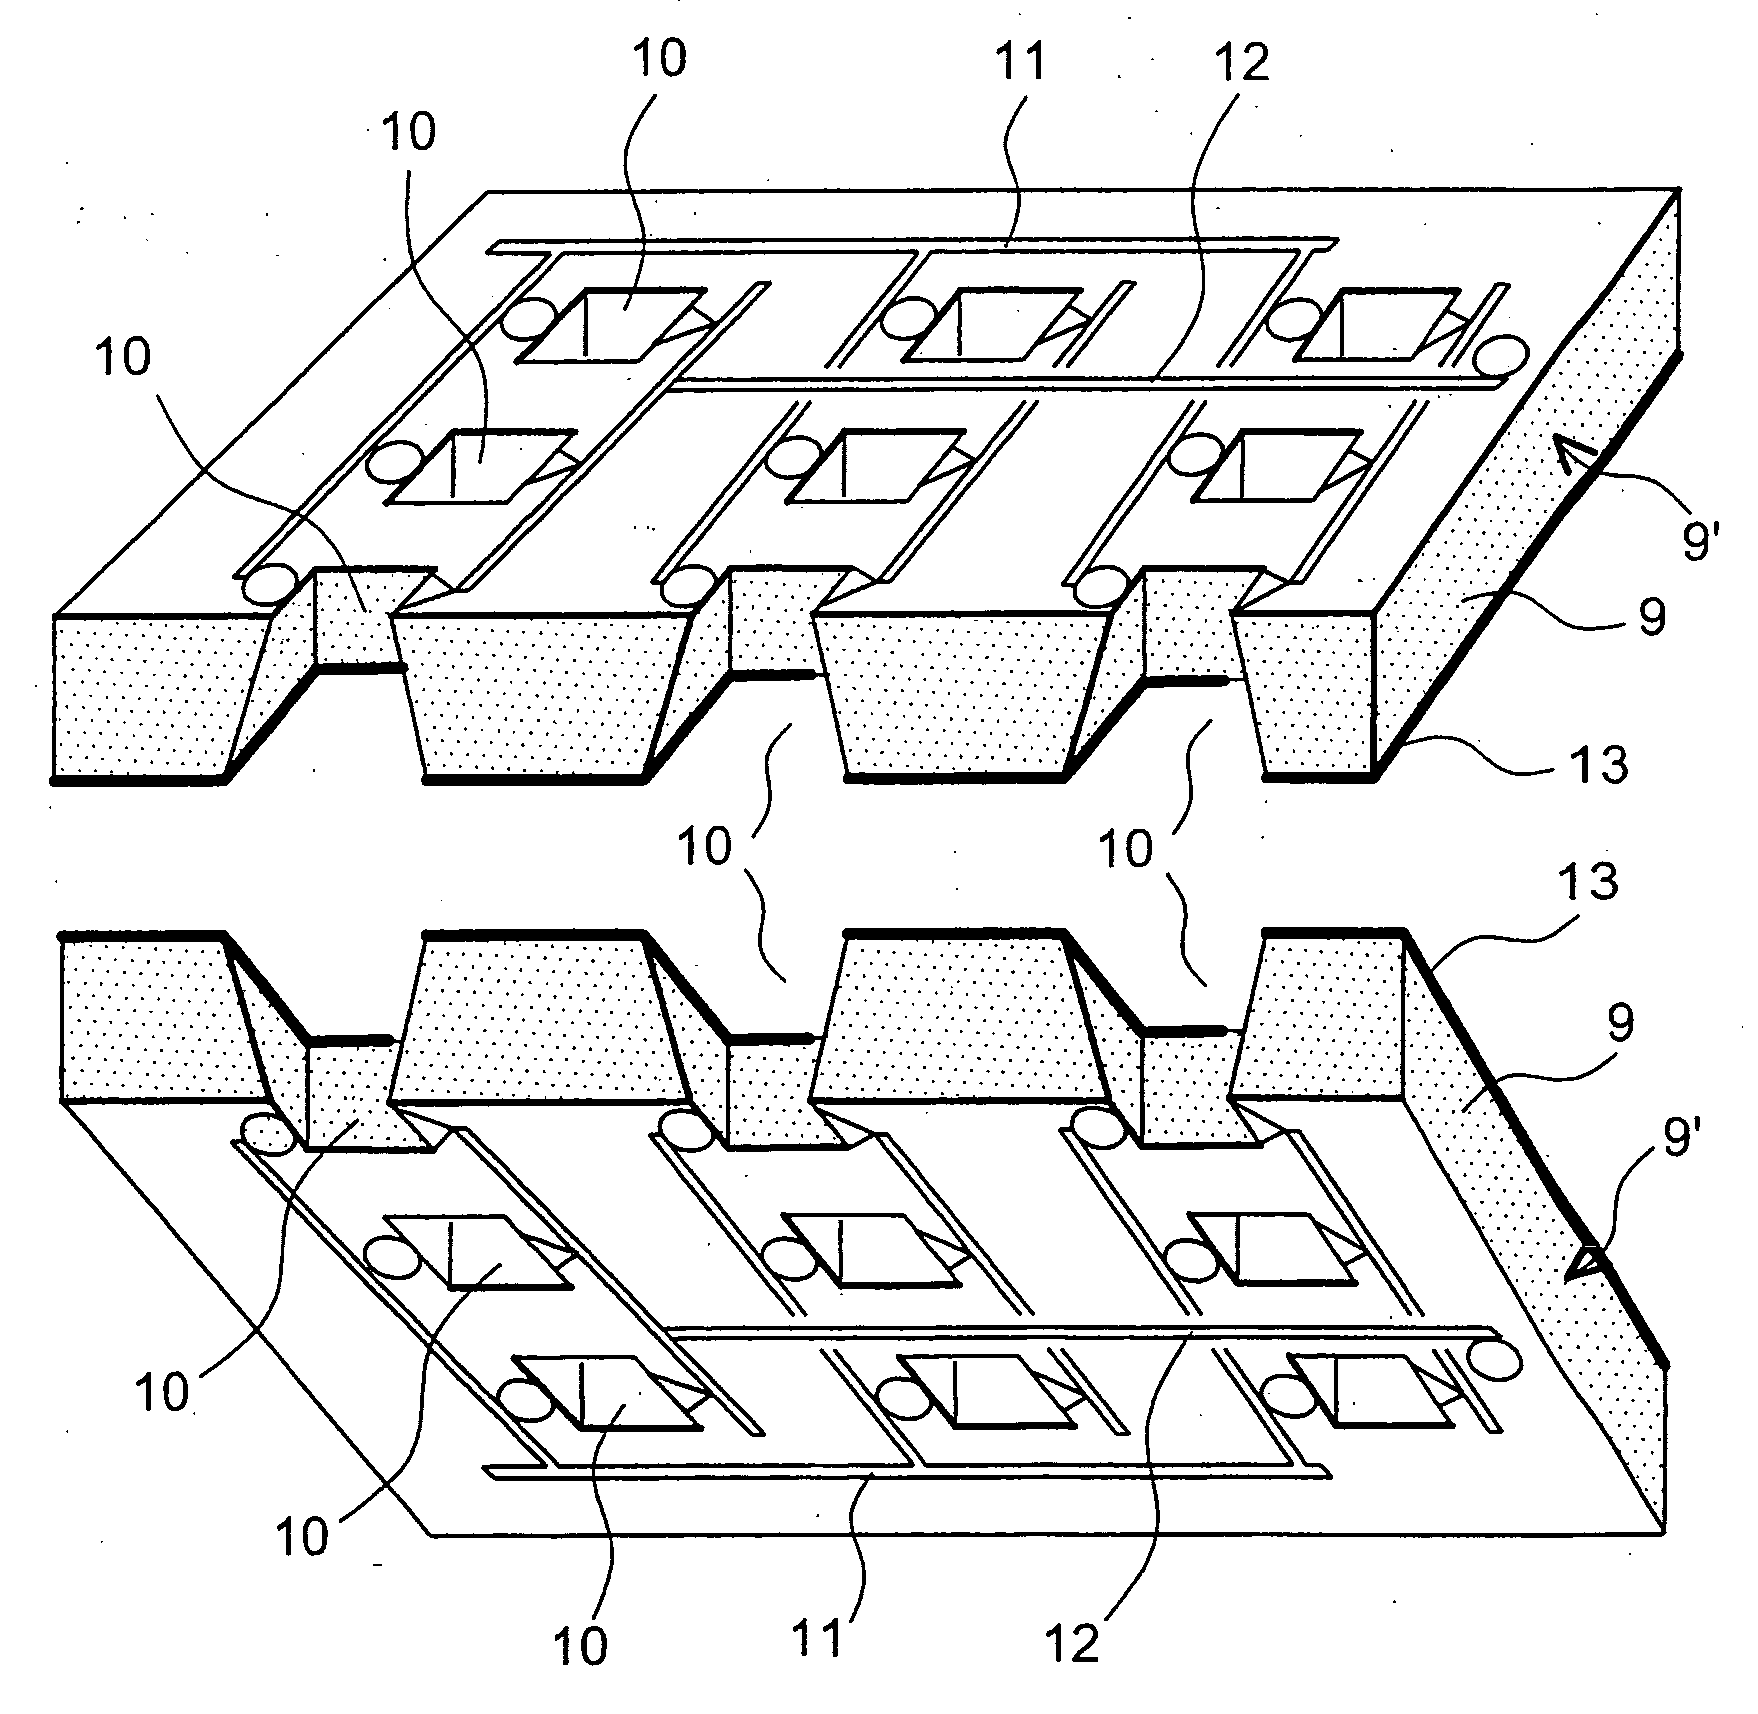 Method for making a fuel cell with large active surface and reduced volume